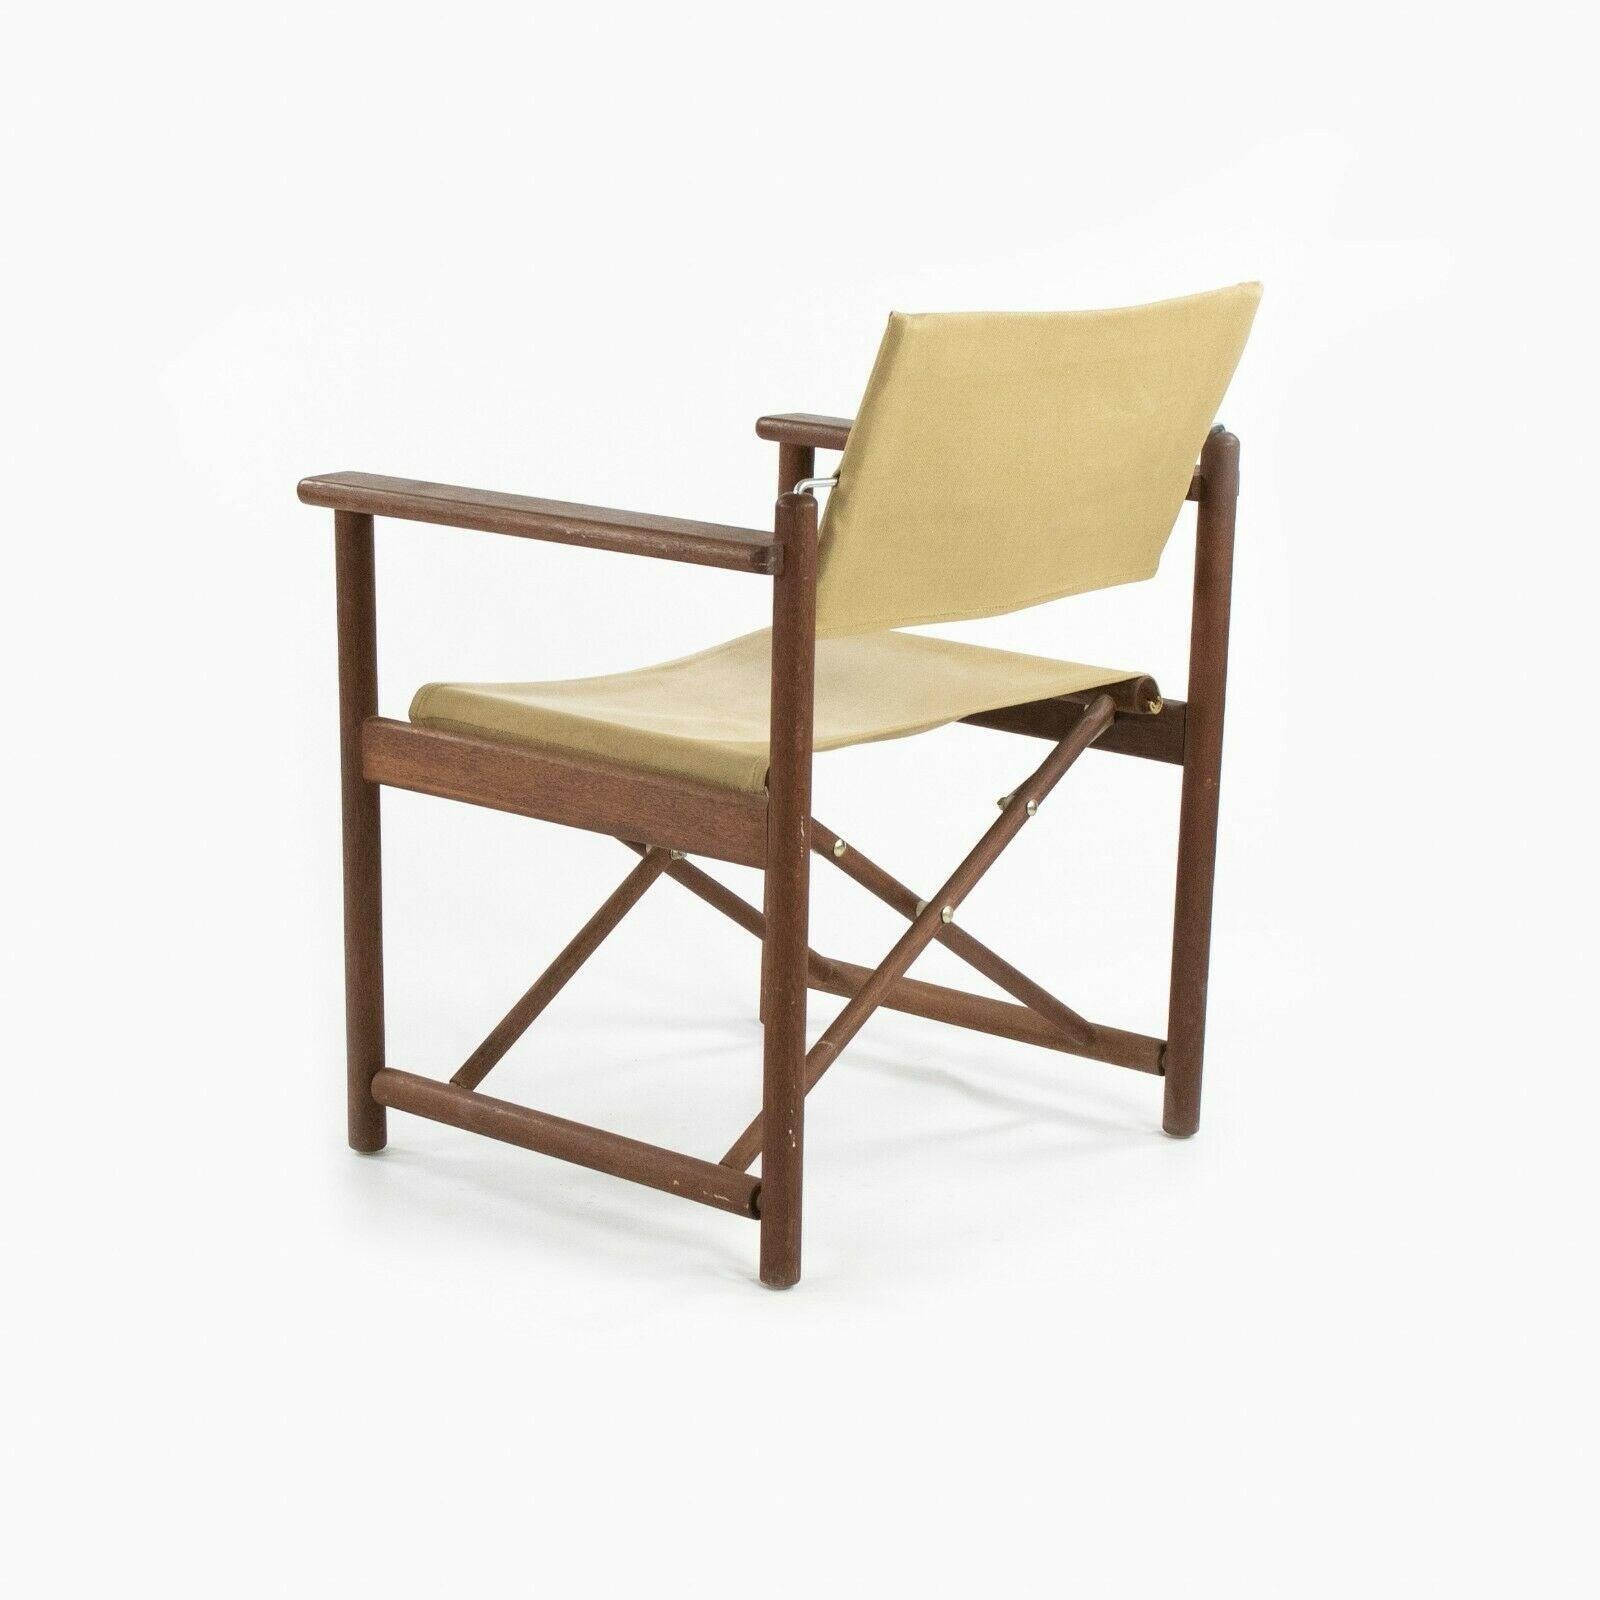 1960s Danish Modern Walnut and Canvas Folding Campaign Chair For Sale 2